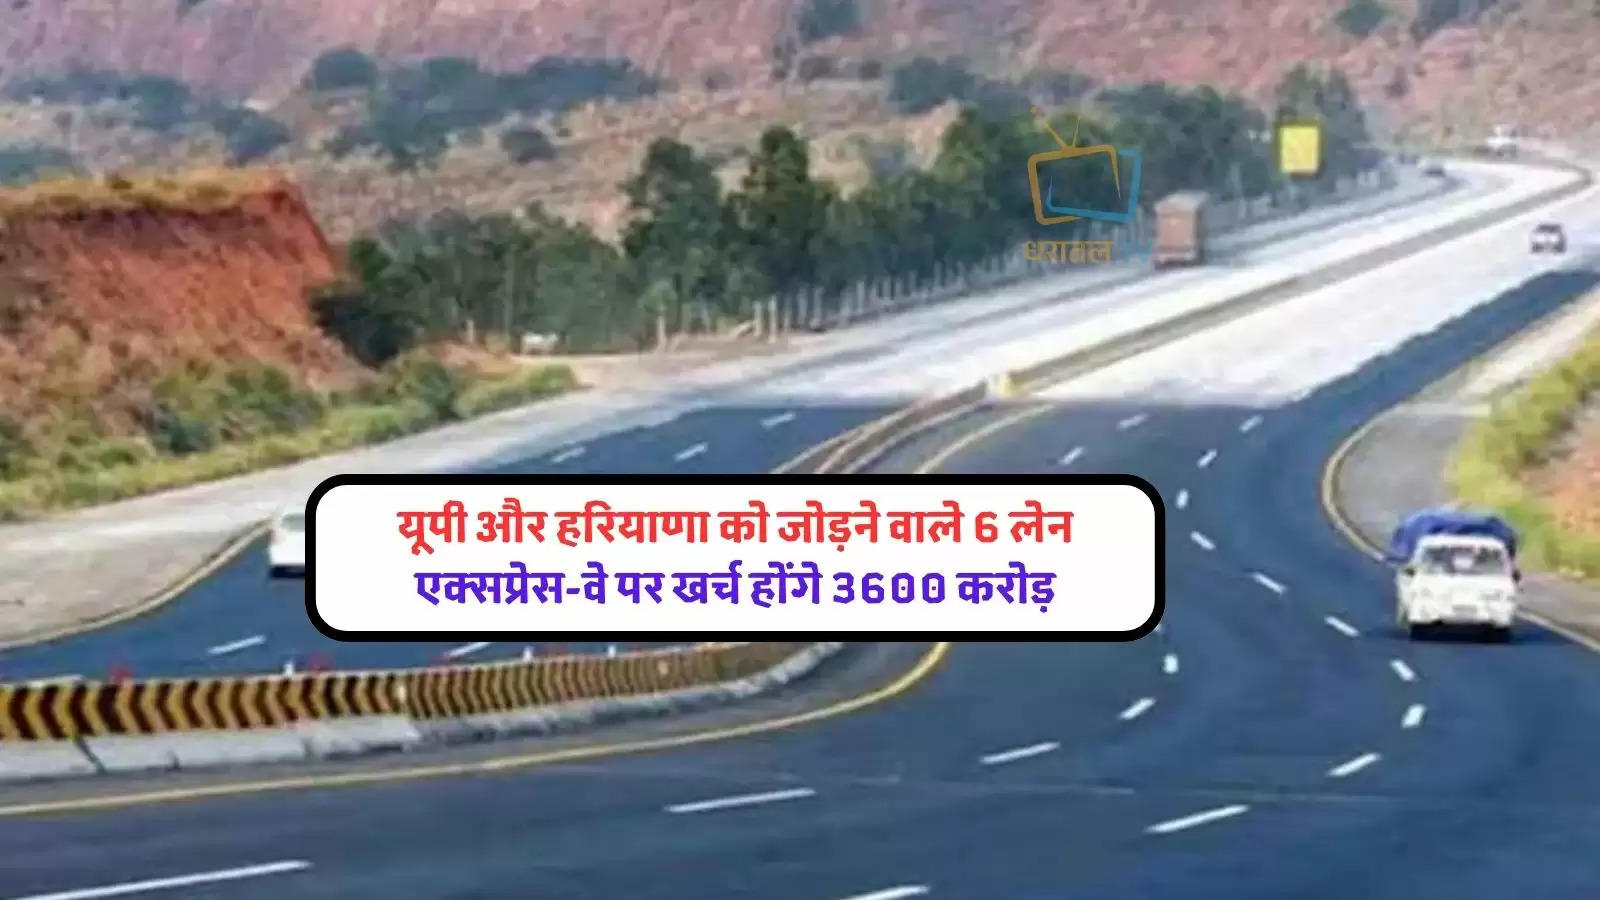 expressways-ambala-shamli-expressway-construction-work-started-in-haryana-check-route-cost-completion